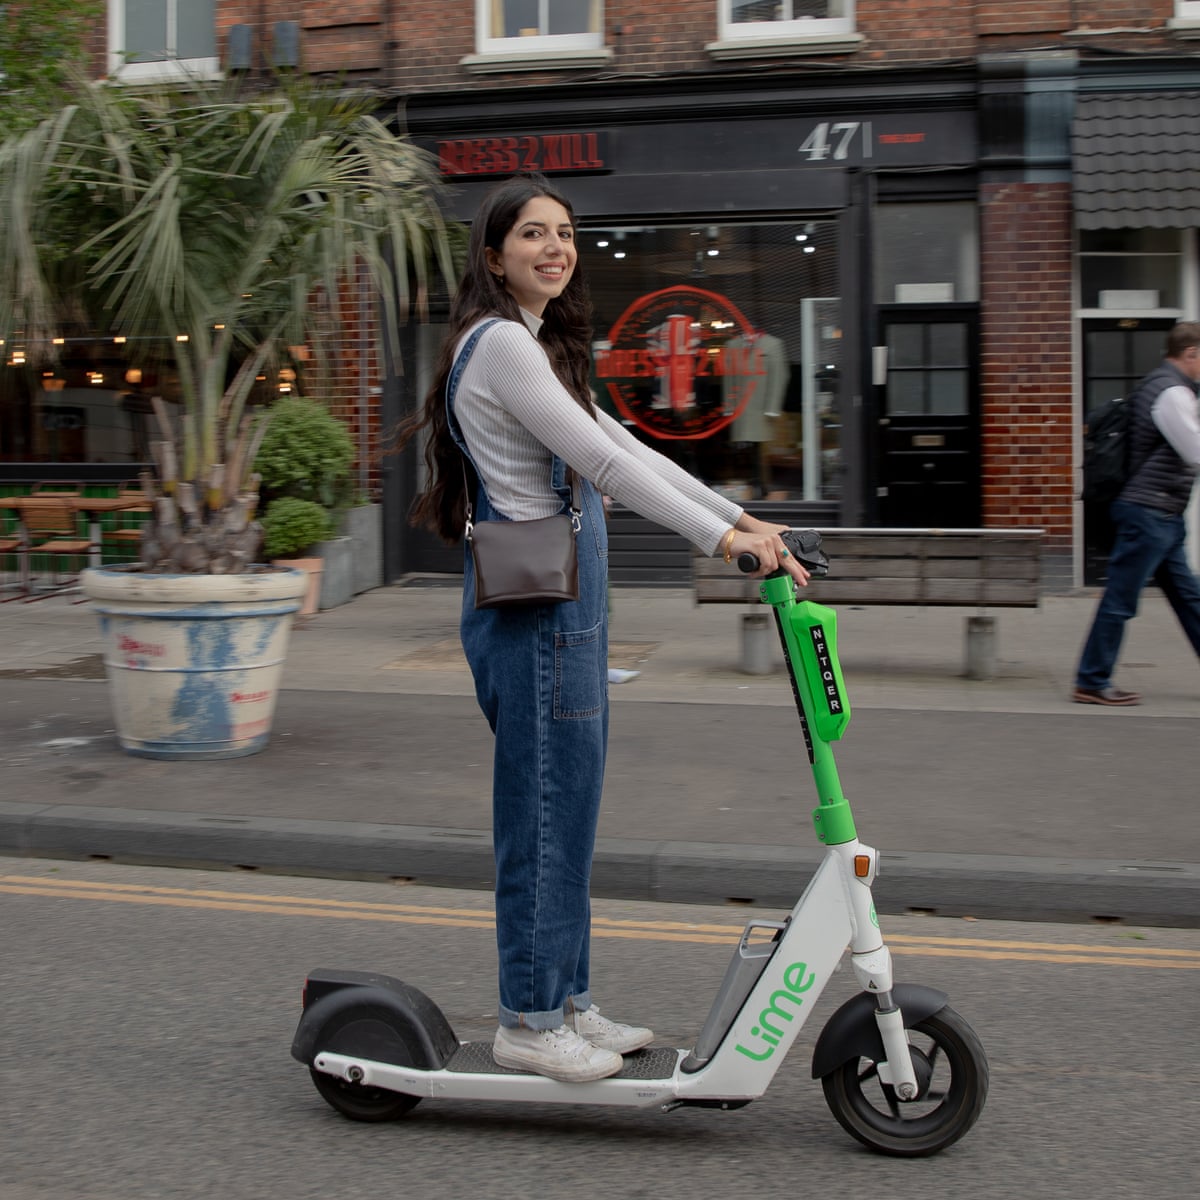 renhed Pelmel Ruckus I know they're exciting – but calm down!' Britain's love-hate affair with  the e-scooter | Transport | The Guardian